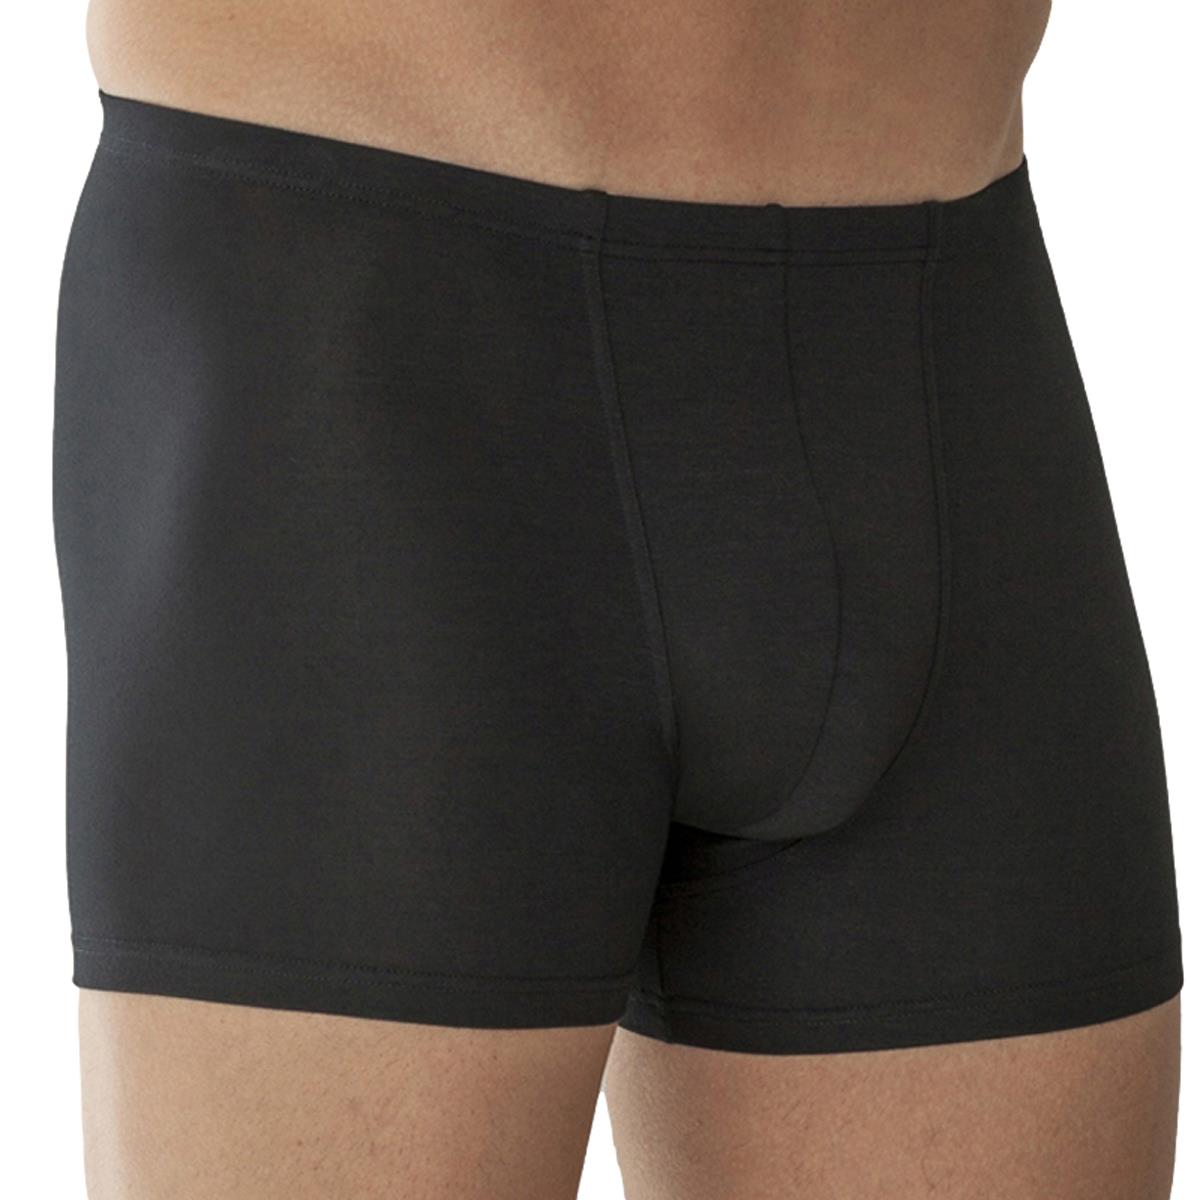 PACT Men's Black Everyday Extended Boxer Brief 4-Pack S